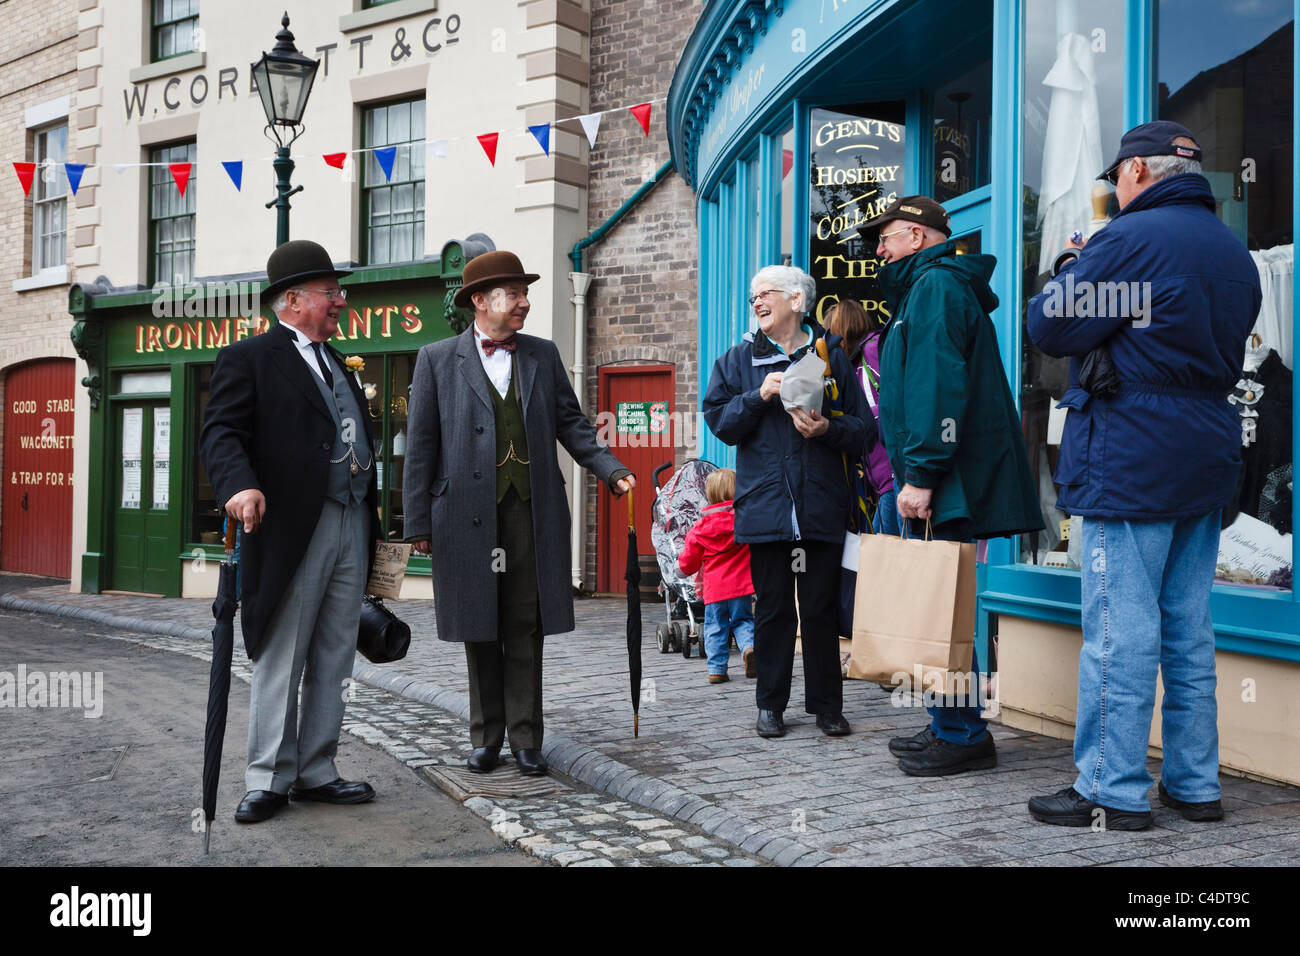 Visitors to Blists Hill Victorian Town in Ironbridge chat to characters in period costume. Stock Photo